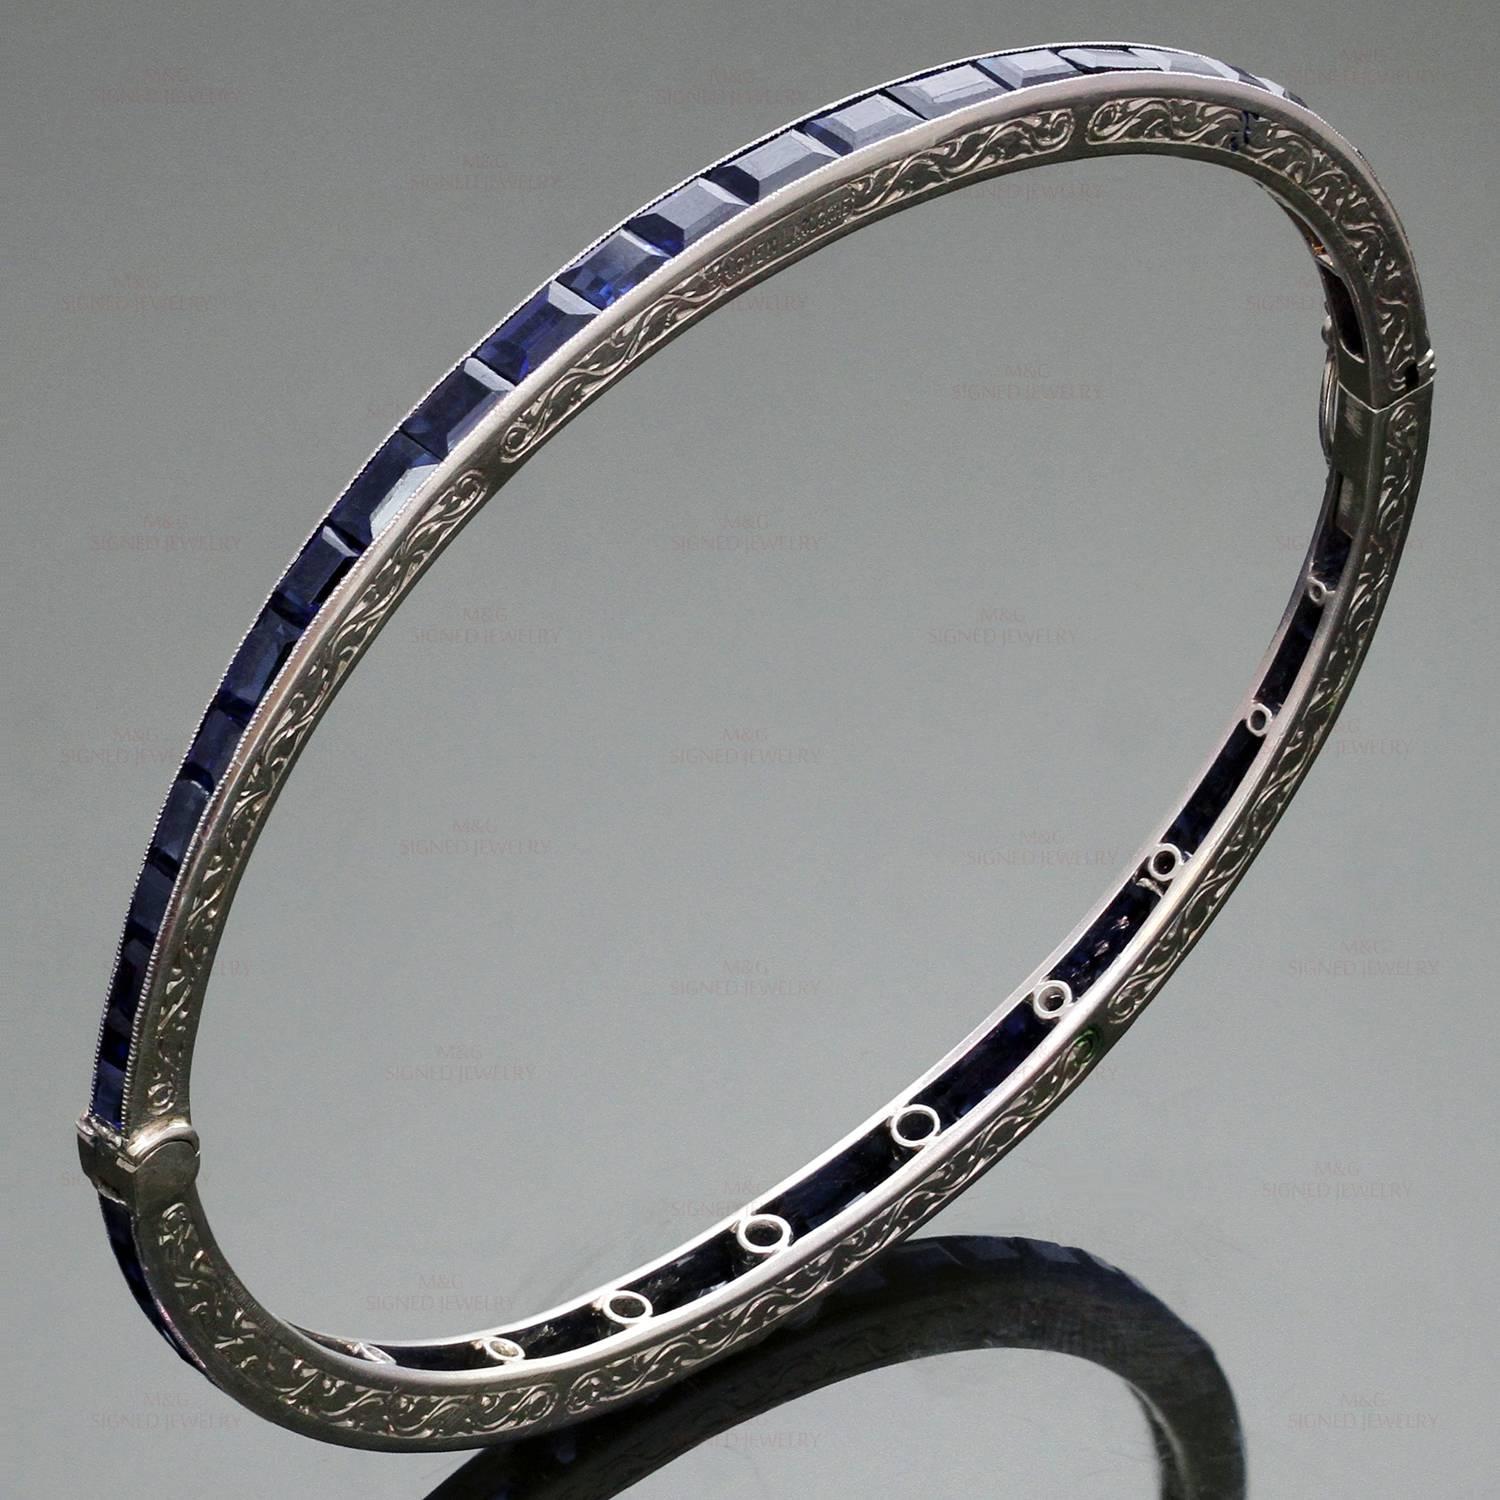 This timeless Coven-LaCloche art deco bracelet features a delicate filligree design hand-crafted in platinum and set with 56 french-cut genuine blue sapphires. The stones are slightly abraded. Made in France circa 1920s. Measurements: 0.11"